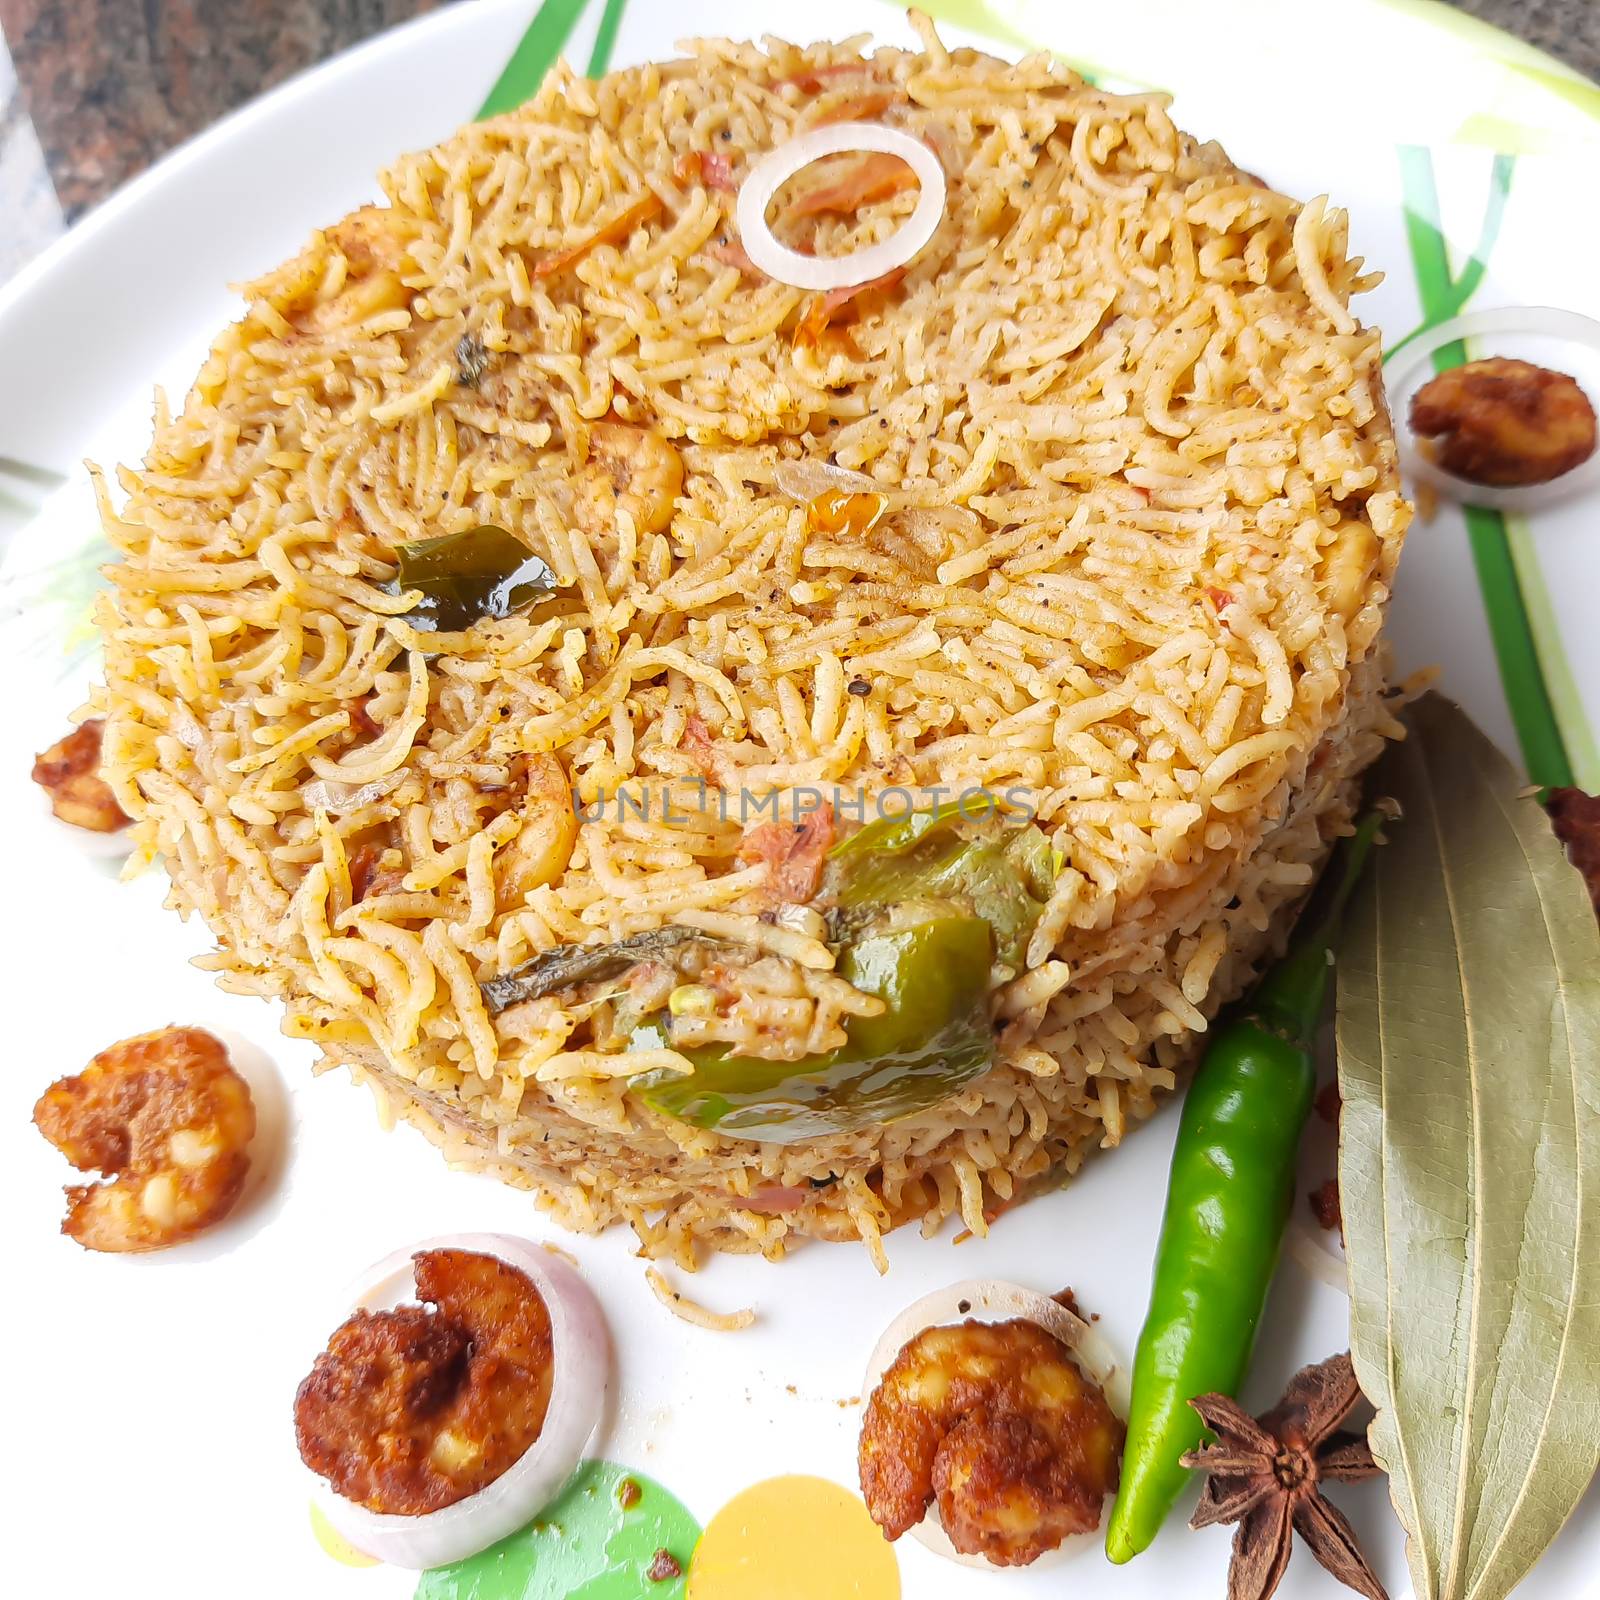 Colorful Delicious yummy prawn briyani with prawn fry in center with prawn fry and raita plated beautifully in white plate with bayleaf and it's one of favorite restaurant cuisine food